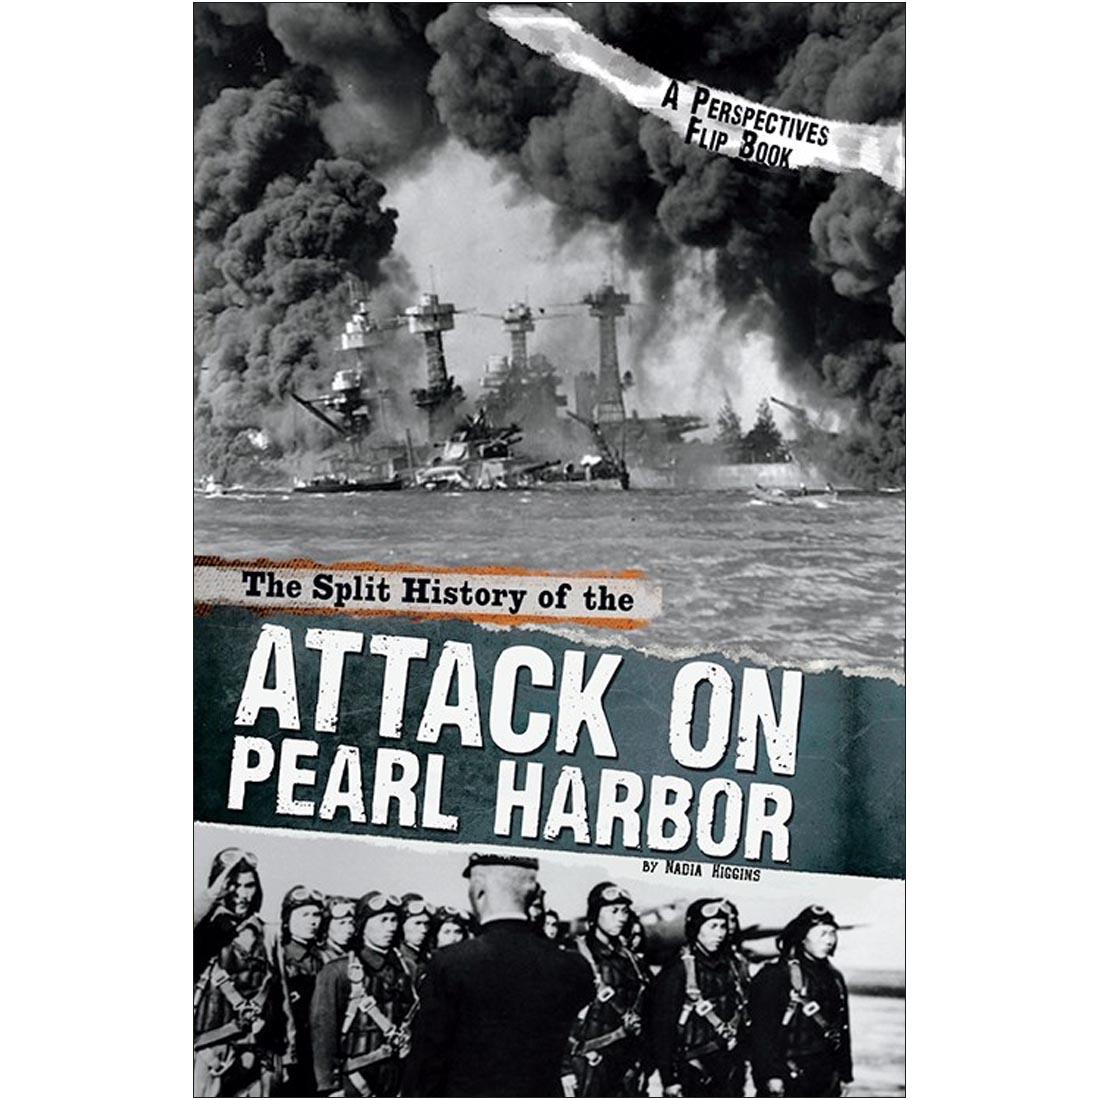 The Split History of the Attack on Pearl Harbor